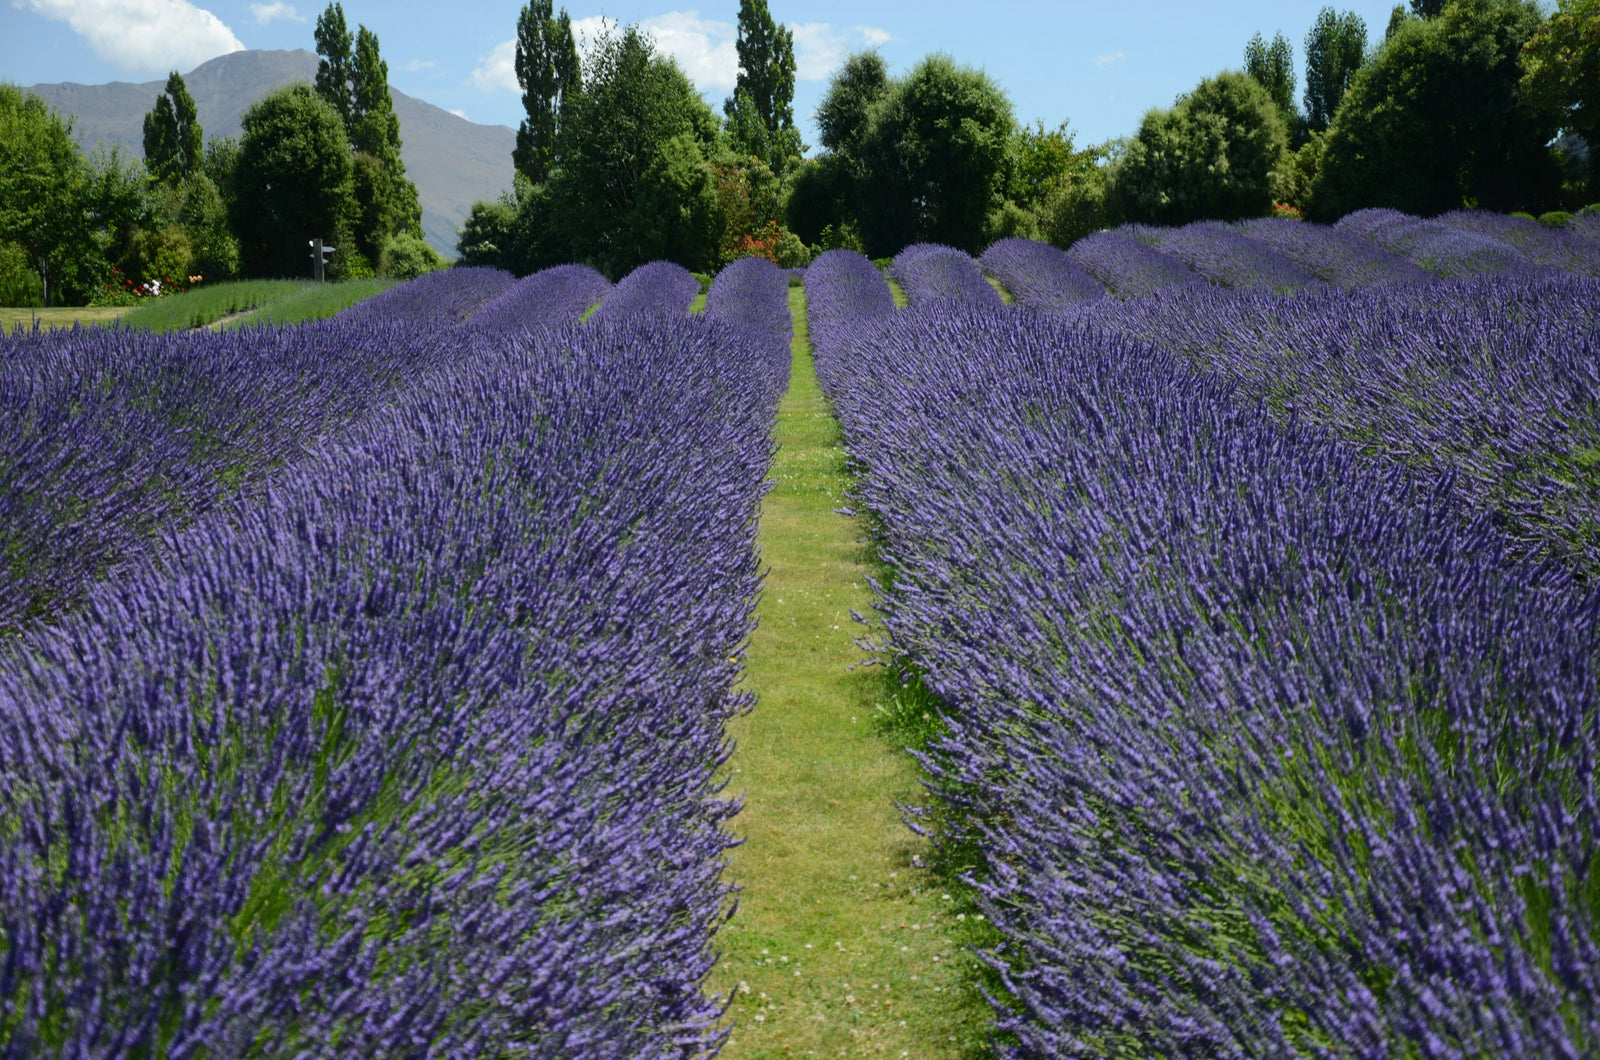 A field of lavender parted by a clean grass path with no weeds.